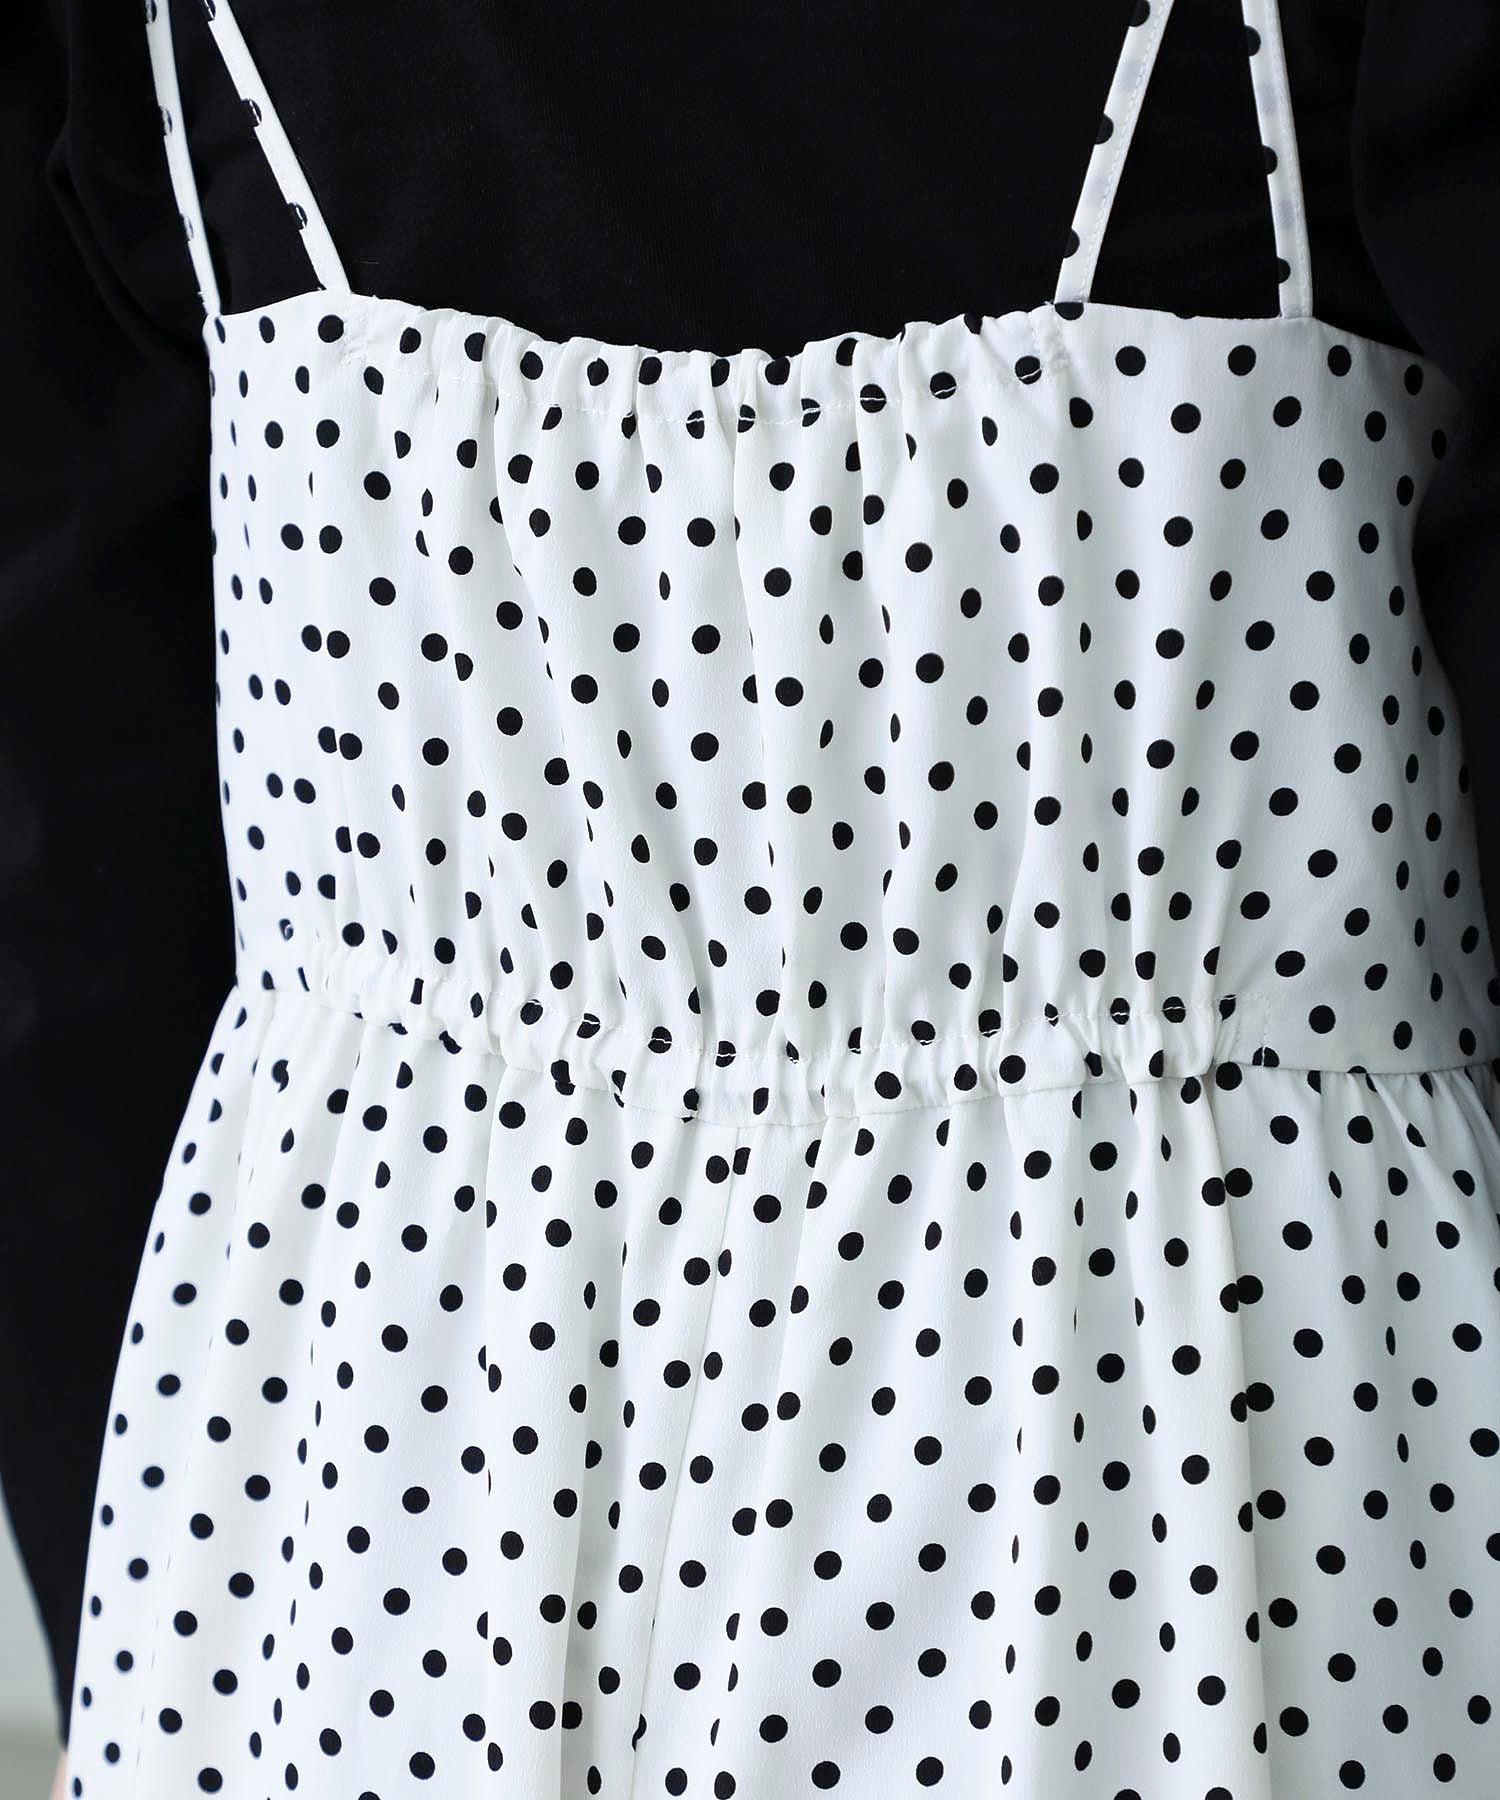 POLKA DOT CAMISOLE ALL IN ONE MILKFED.